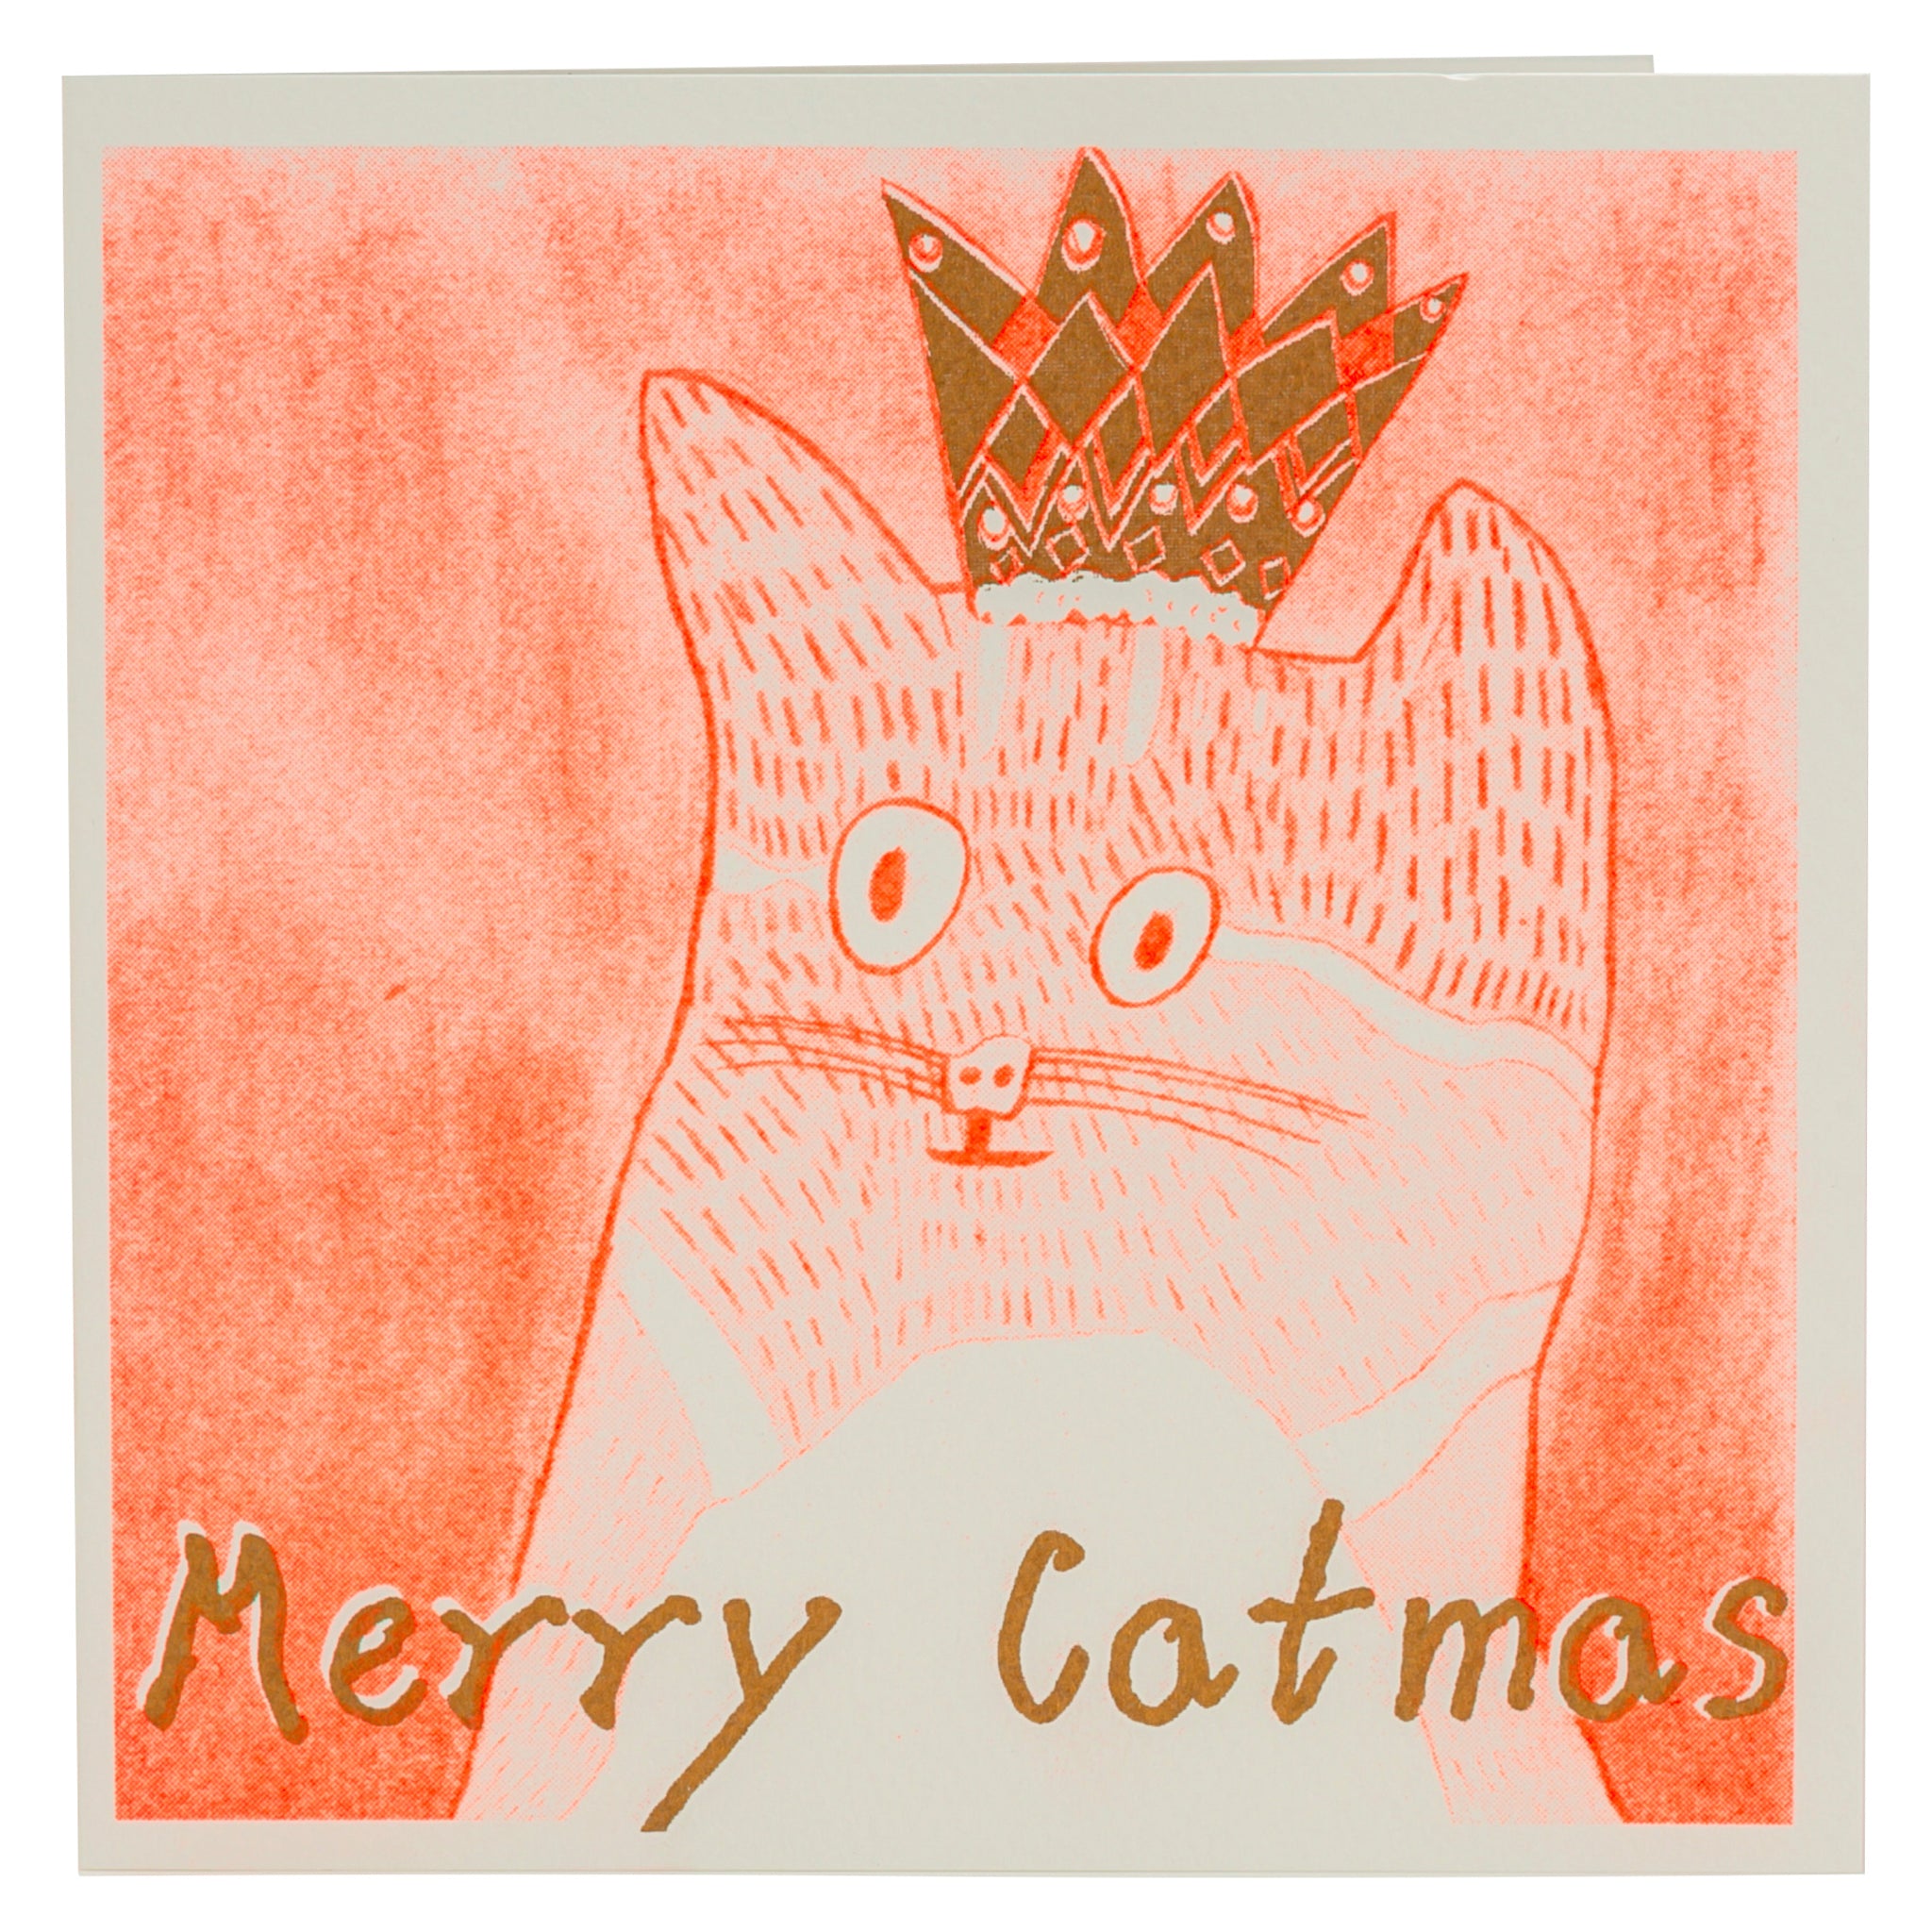 An orange and gold hand drawn christmas card with a picture of a cat and the words merry catmas